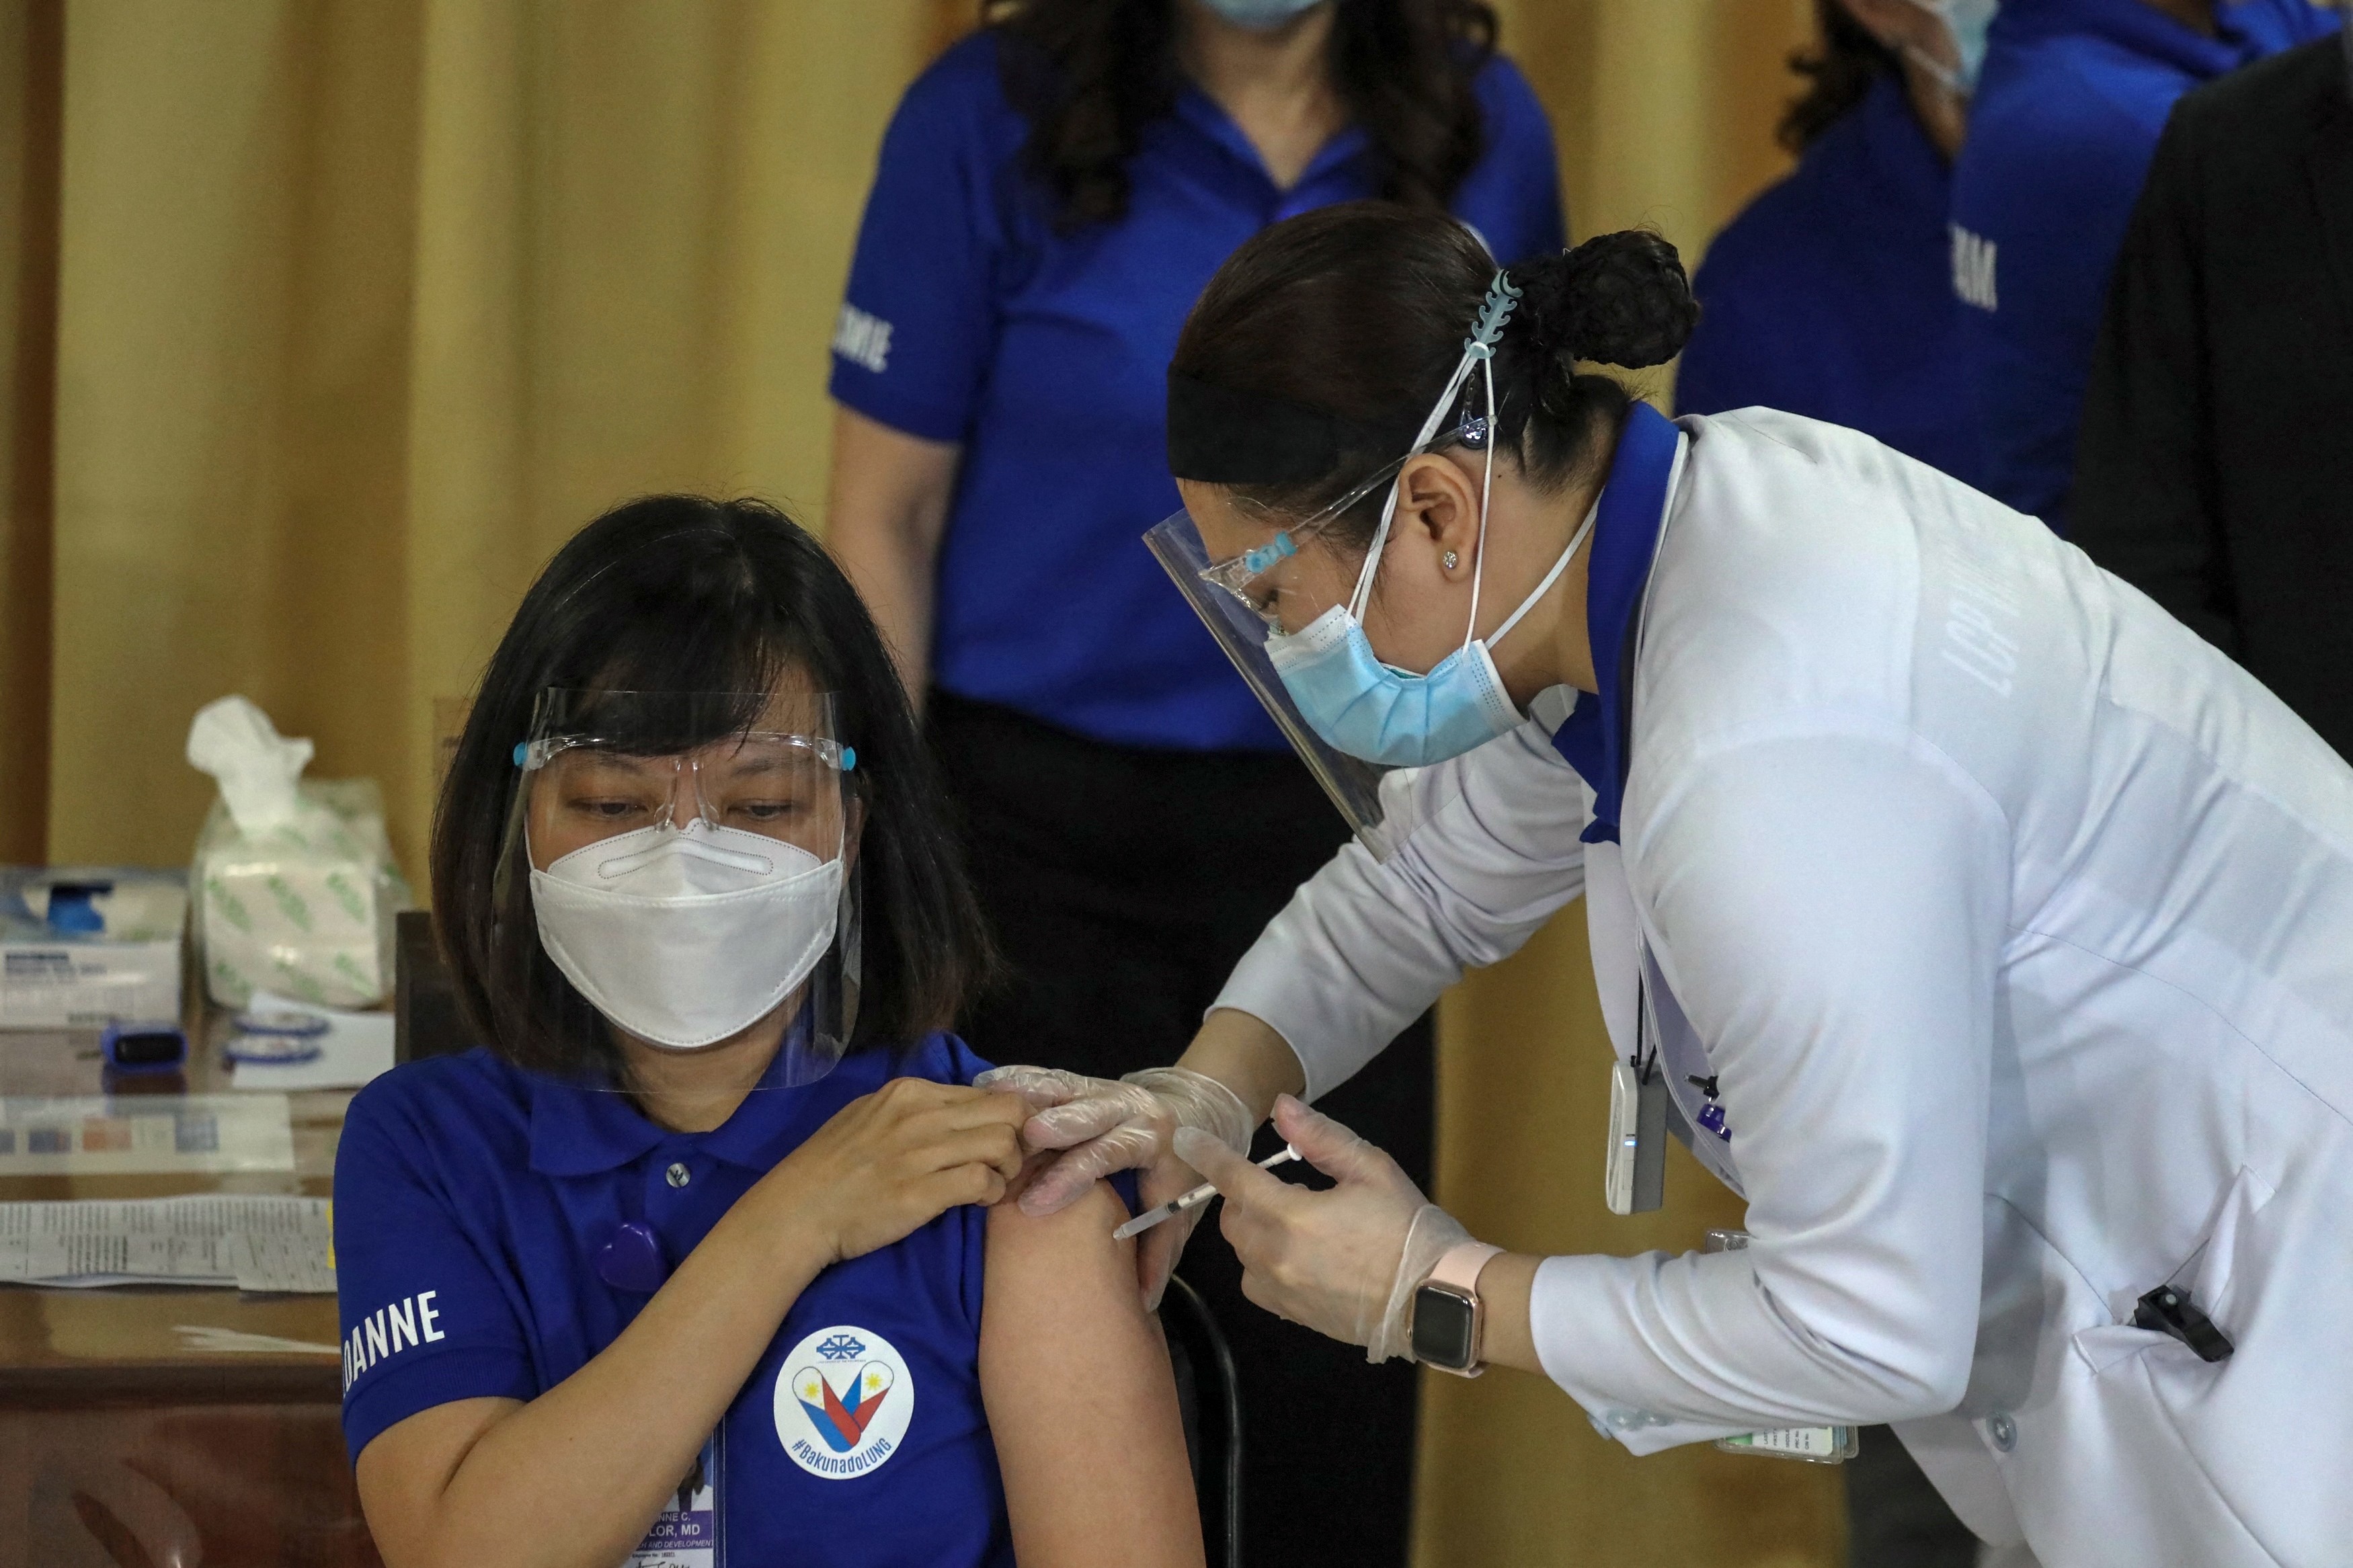 Moving the needle: Havas Life Philippines tackles COVID vaccine